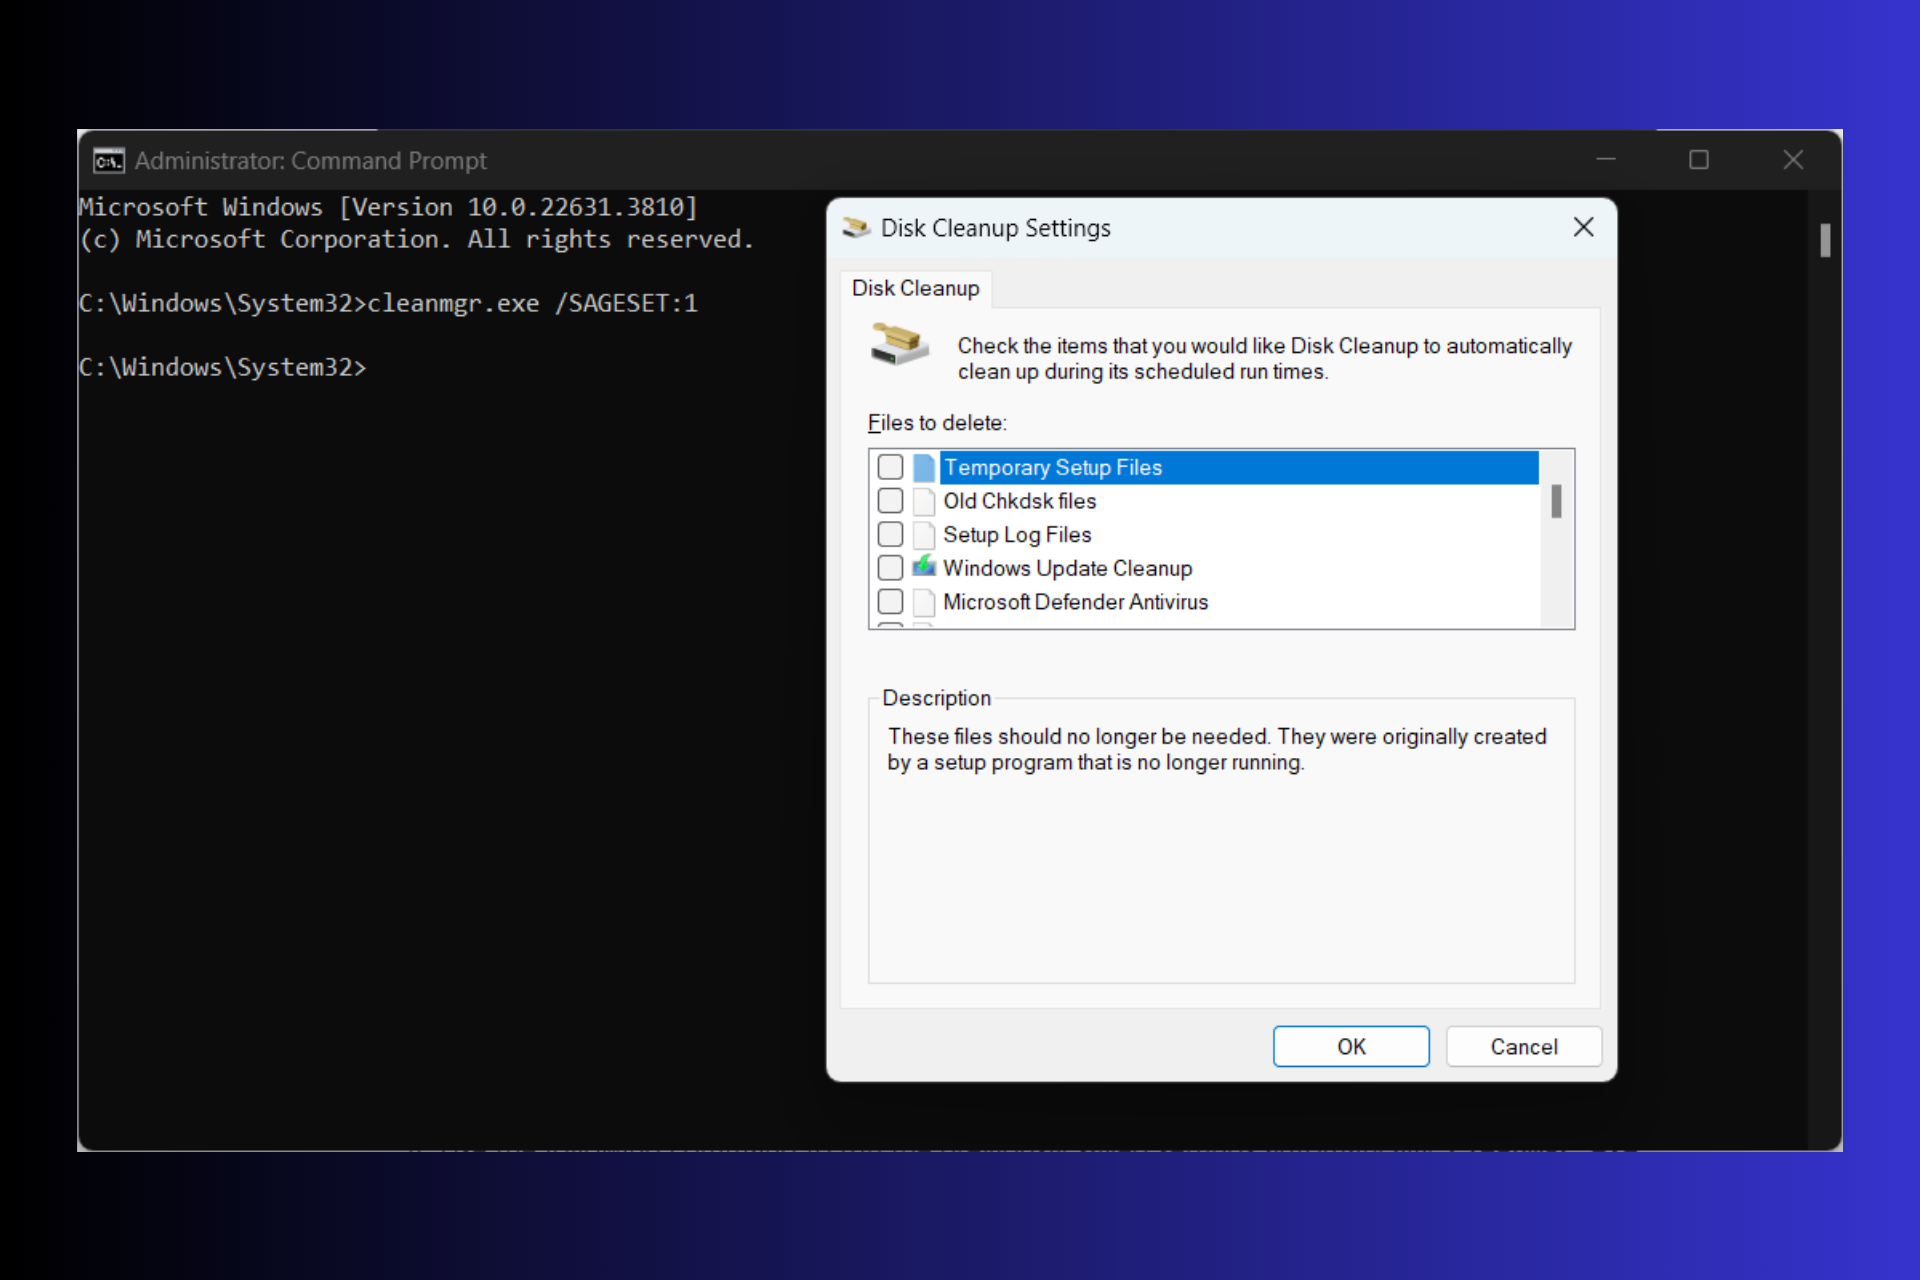 Run Disk Cleanup with command line for silent execution